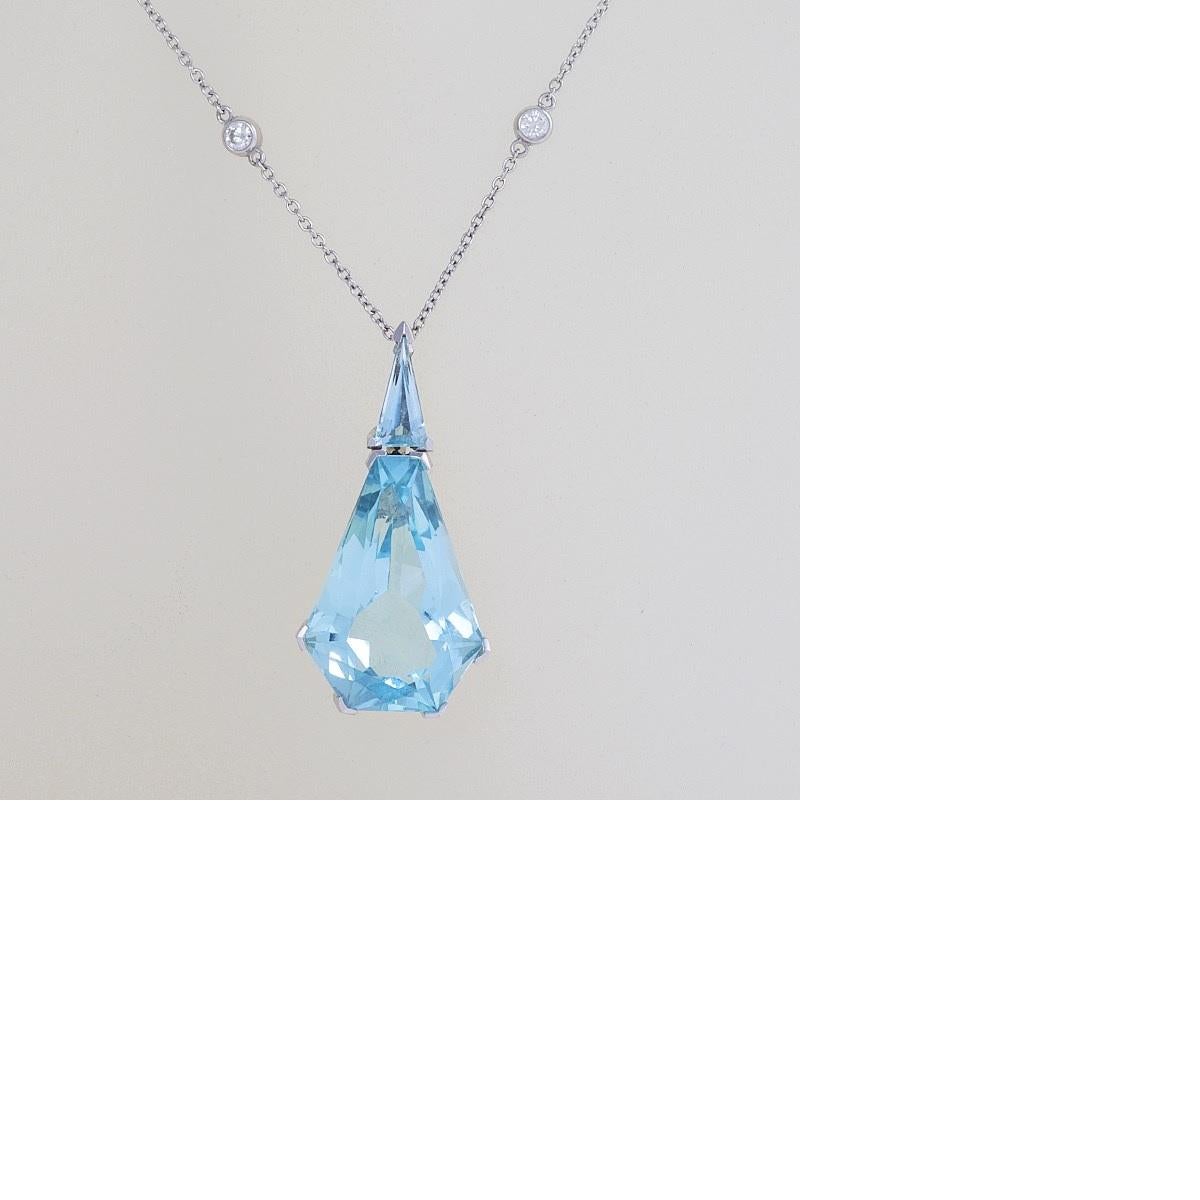 A platinum and 14 karat gold necklace with aquamarine and diamonds. The necklace has one kite cut aquamarine with an approximate total weight of 17.39 carats, and a triangle aquamarine with an approximate total weight of 1.80 carats. The pendant is